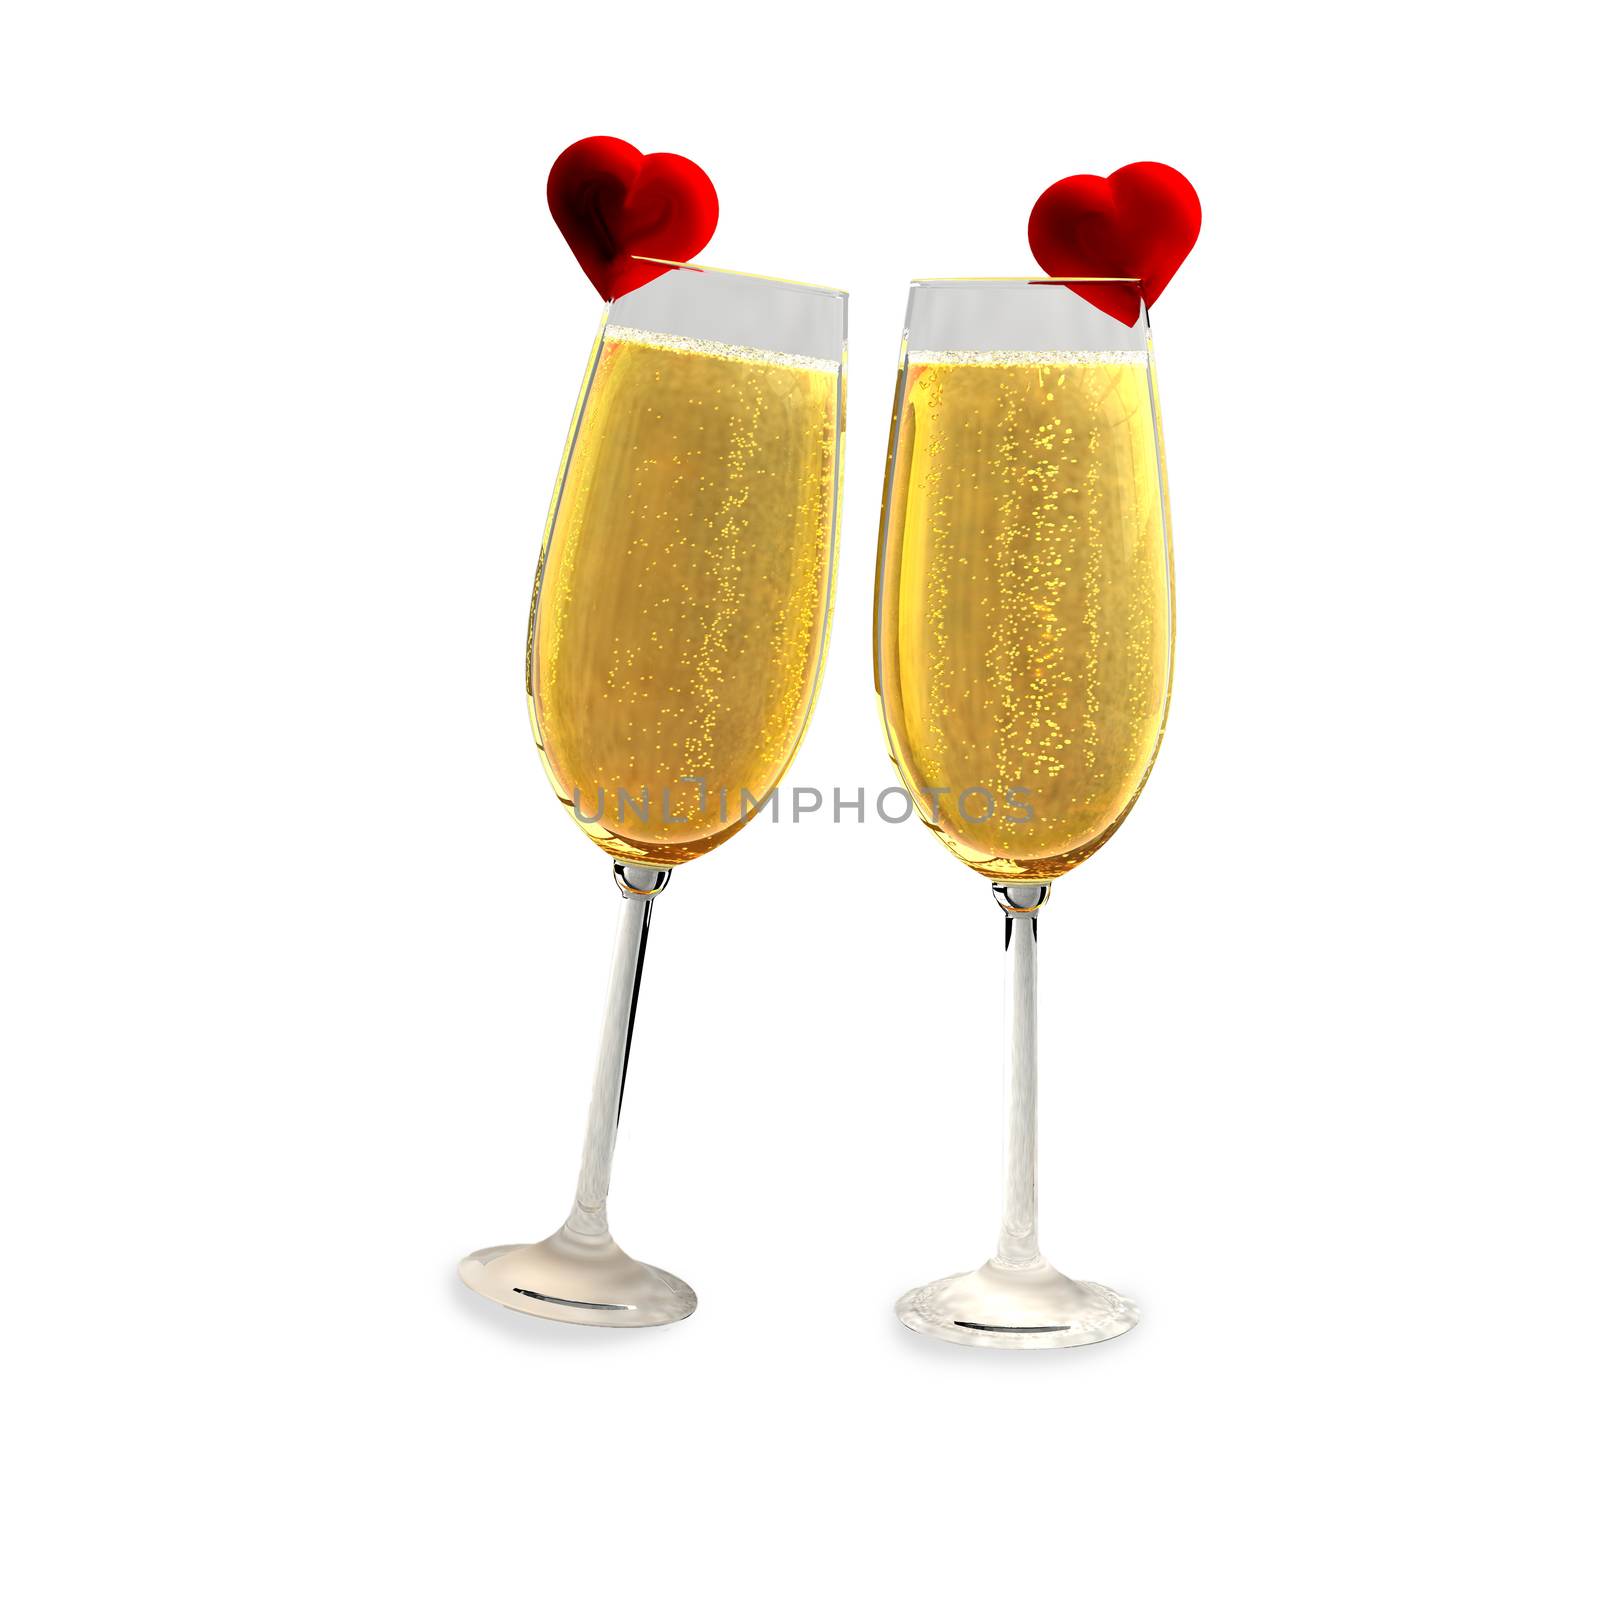 Two champagne glasses with two red hearts on a white background which symbolizes love.